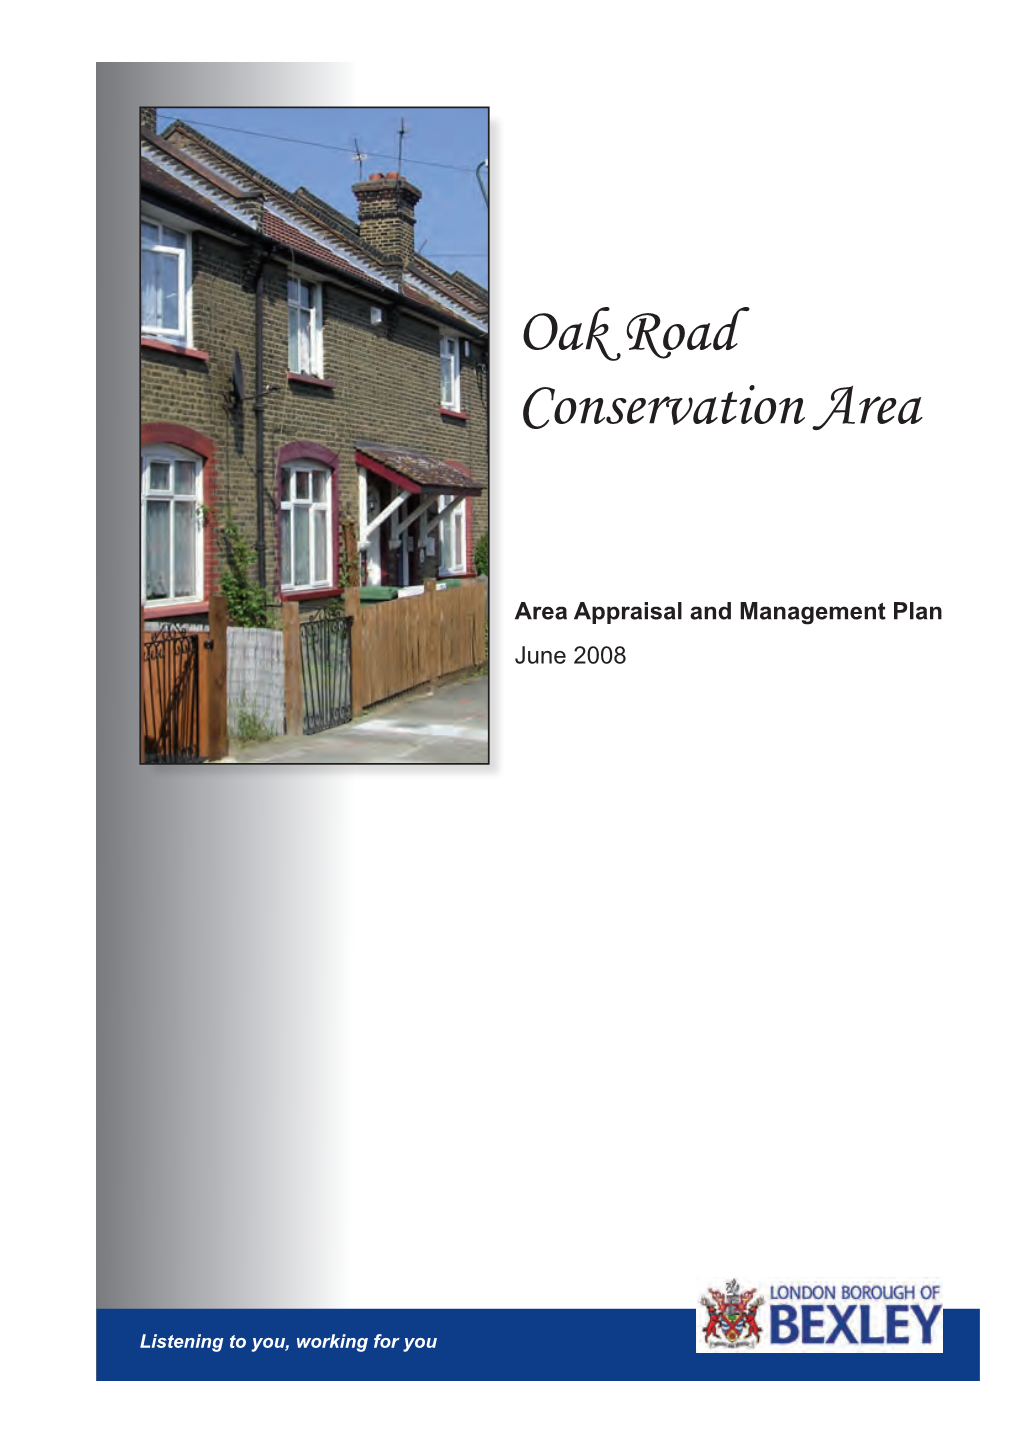 Oak Road Conservation Area Appraisal and Management Plan Were Subject to Public Consultation During February to April 2008